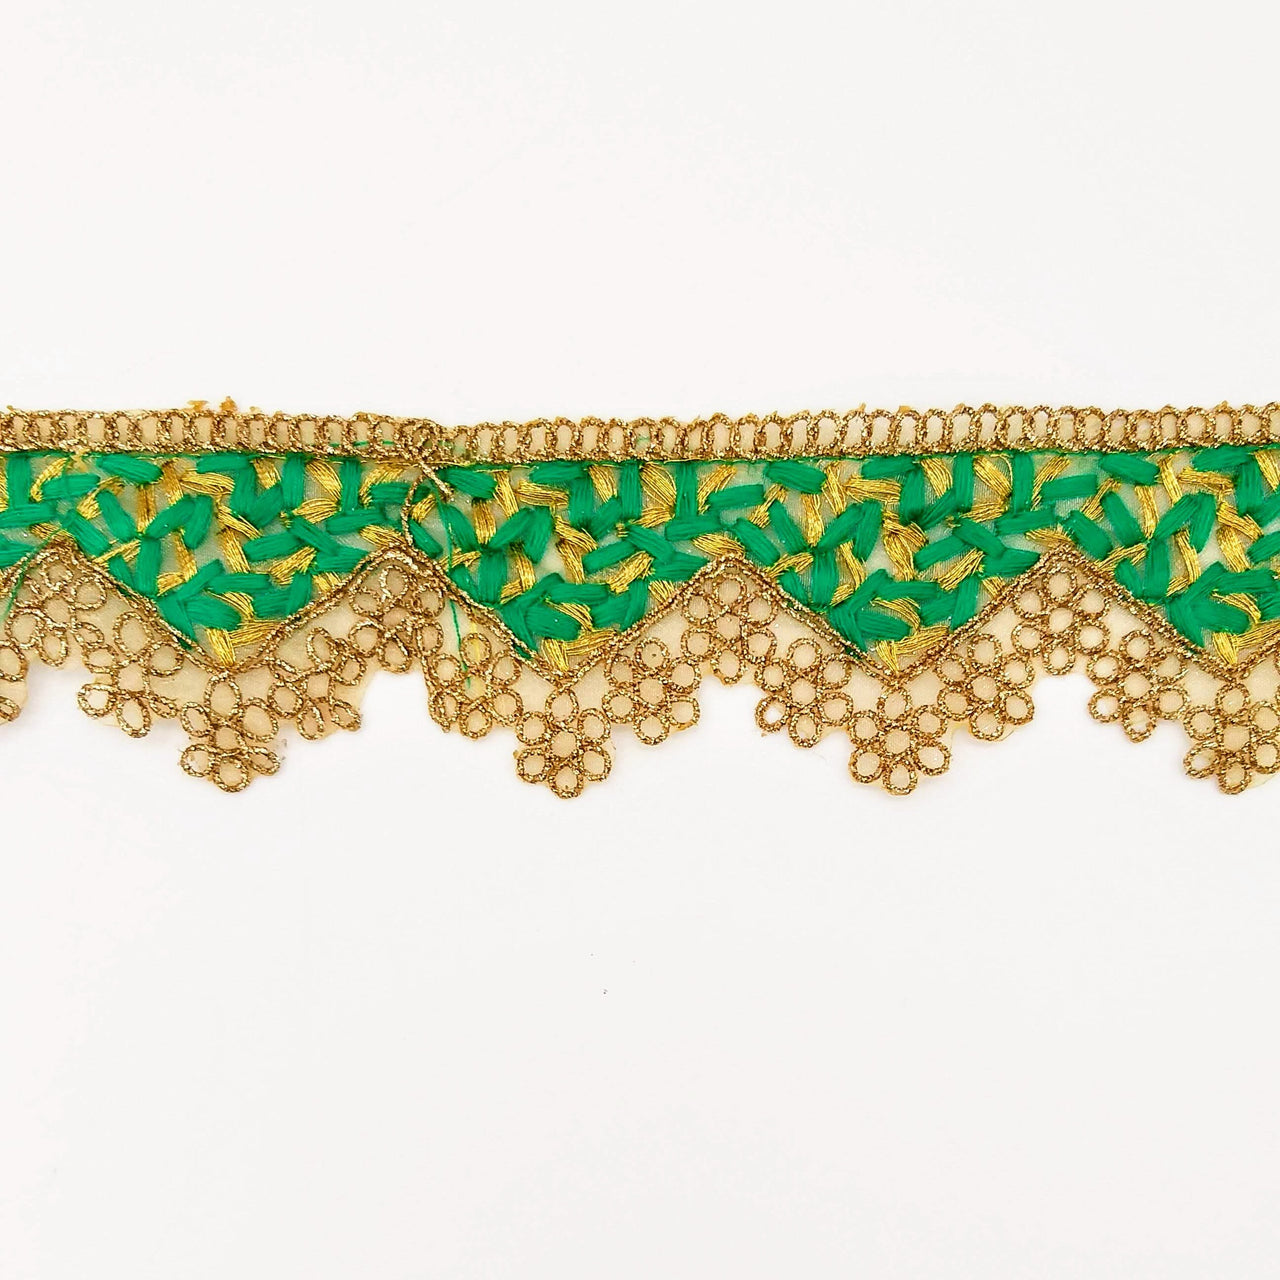 Gold Sheer Tissue Fabric Cutwork Trim with Embroidery in Gold and Green, Scallop Trim, Fringe Trim